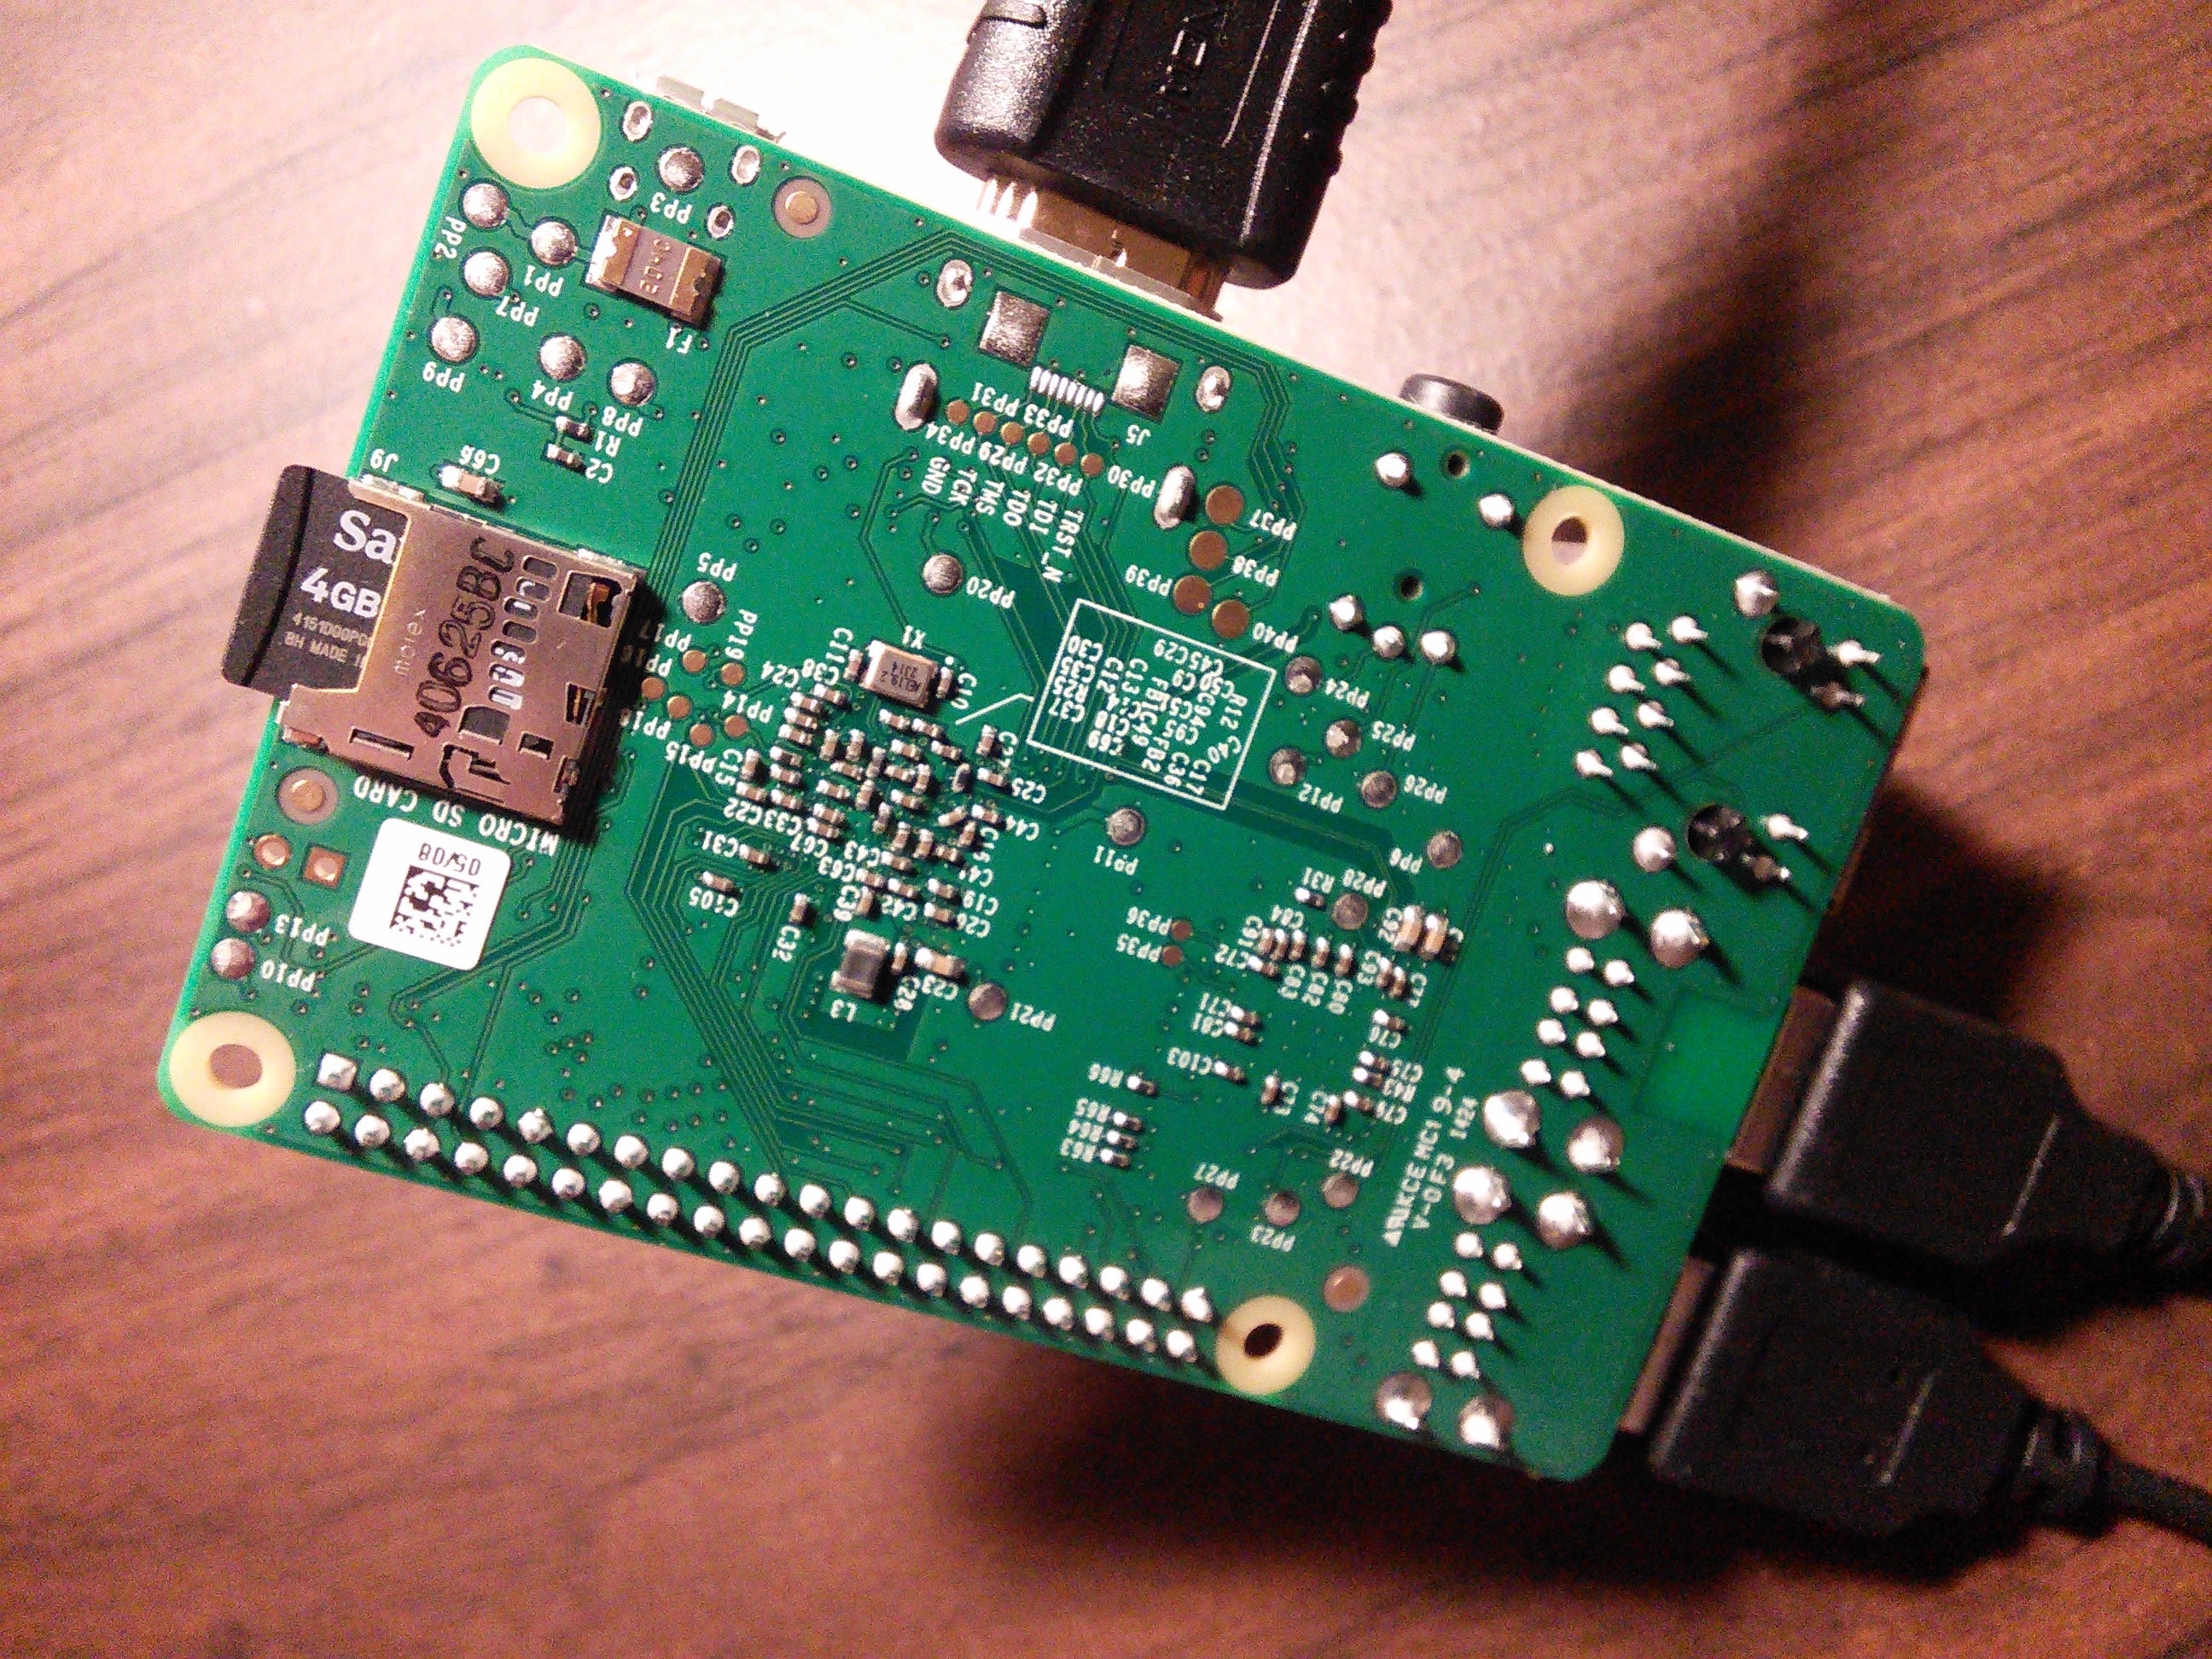 Picture of the back of the Raspberry Pi B+ board showing the microSD card